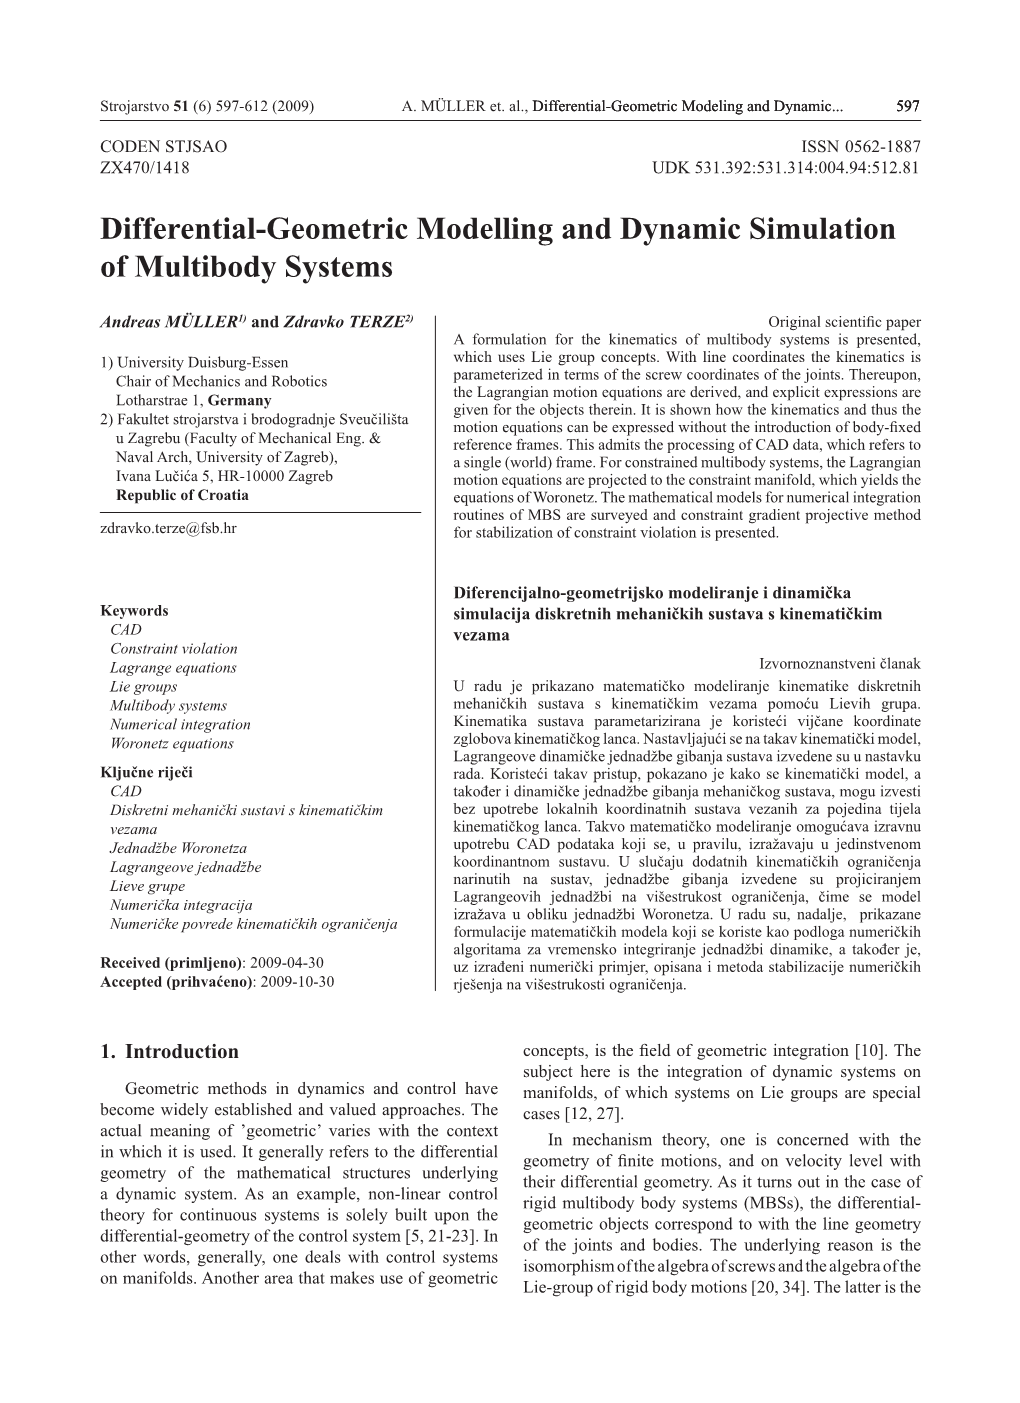 Differential-Geometric Modelling and Dynamic Simulation of Multibody Systems